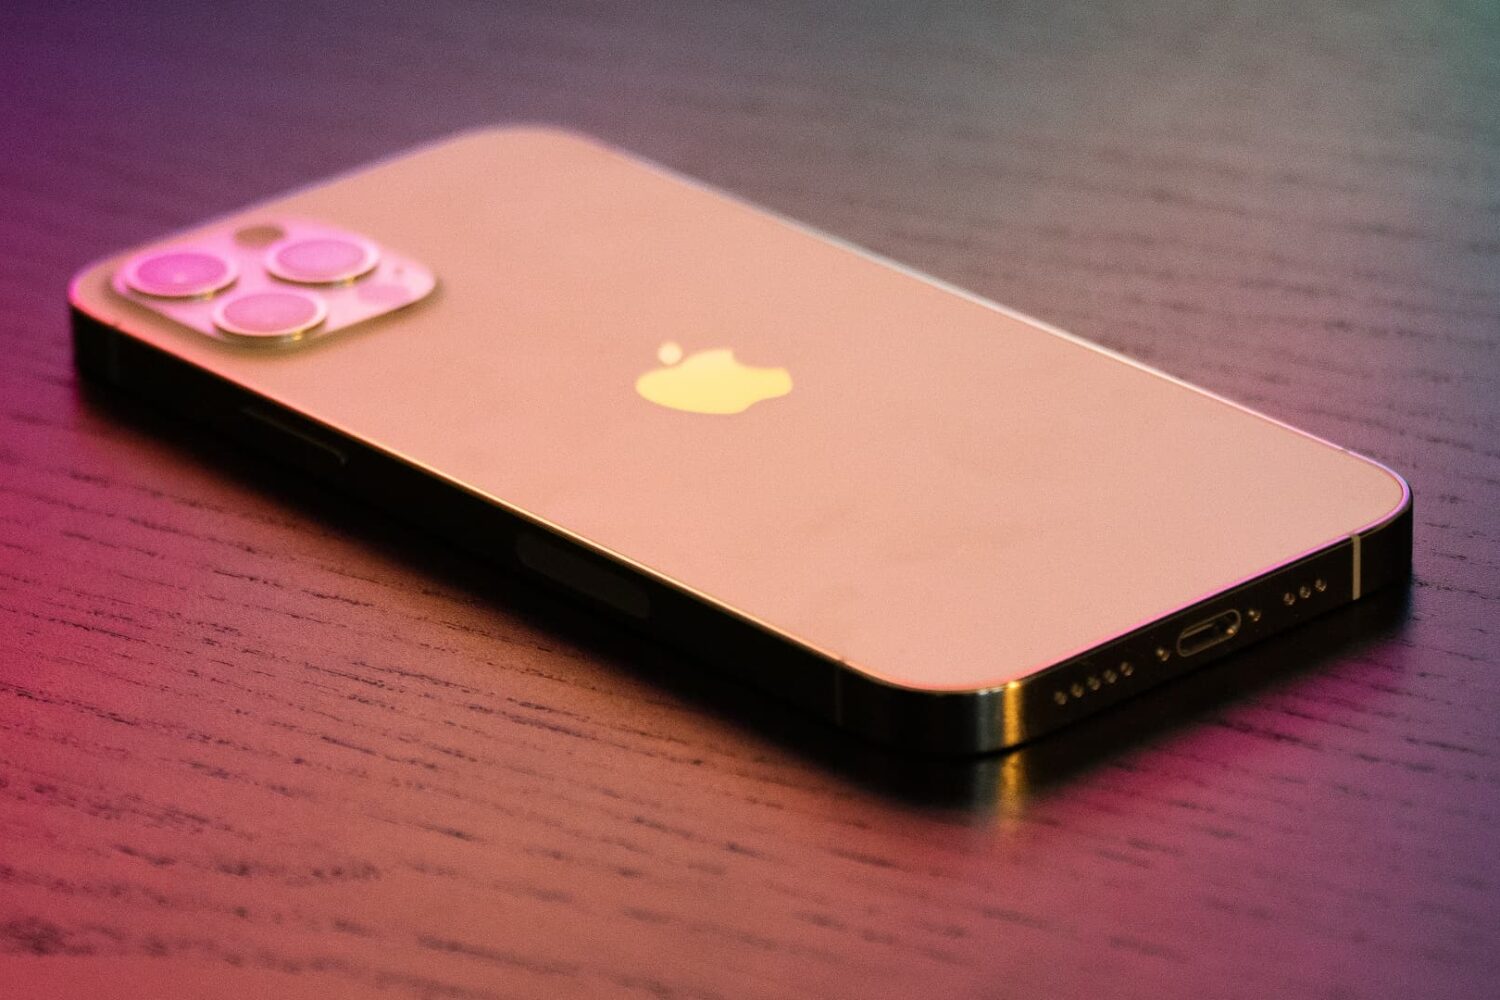 Gold iPhone 12 Pro under colorful lighting, set facedown on a wooden table